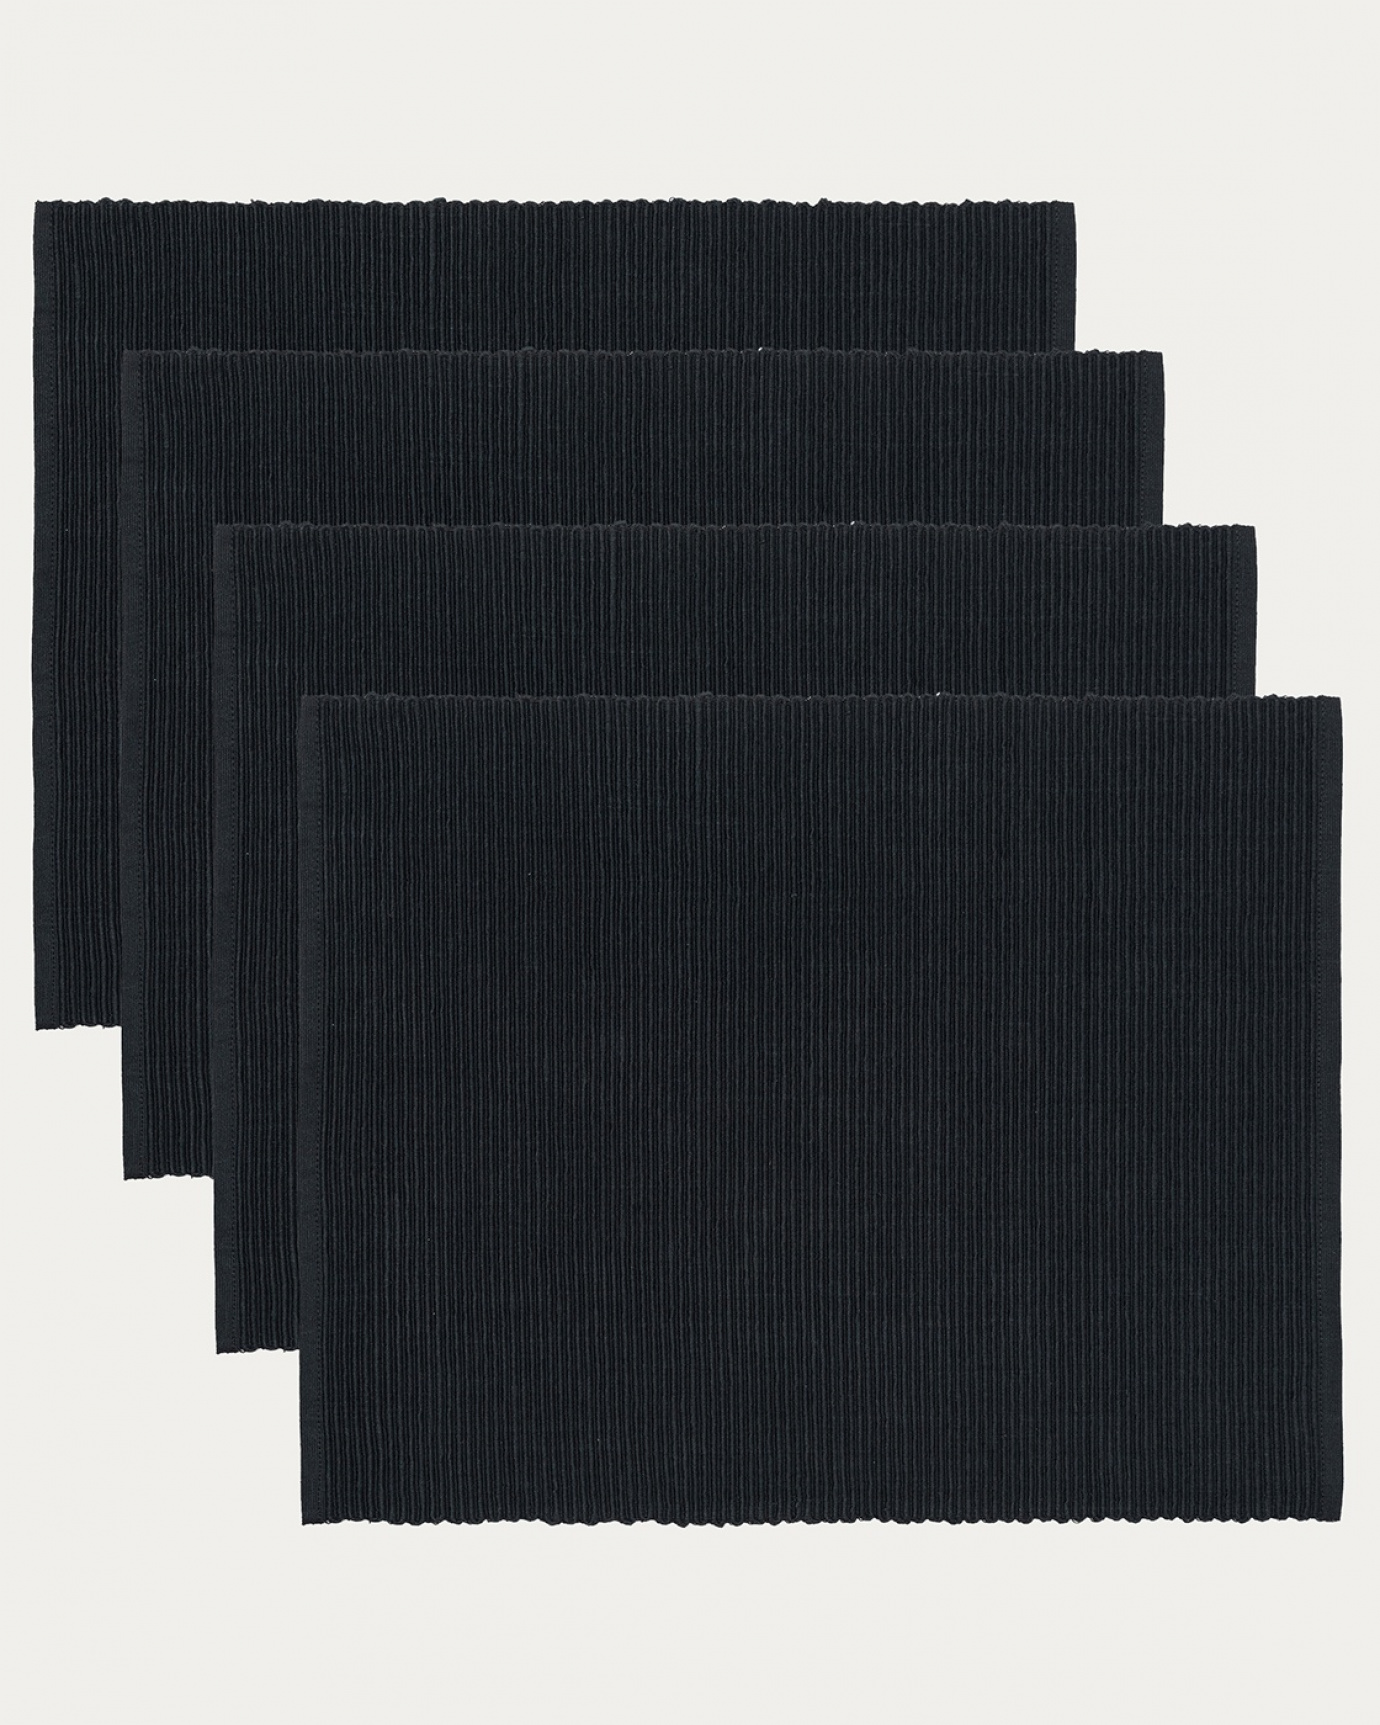 Product image black UNI placemat made of soft cotton in ribbed quality from LINUM DESIGN. Size 35x46 cm and sold in 4-pack.